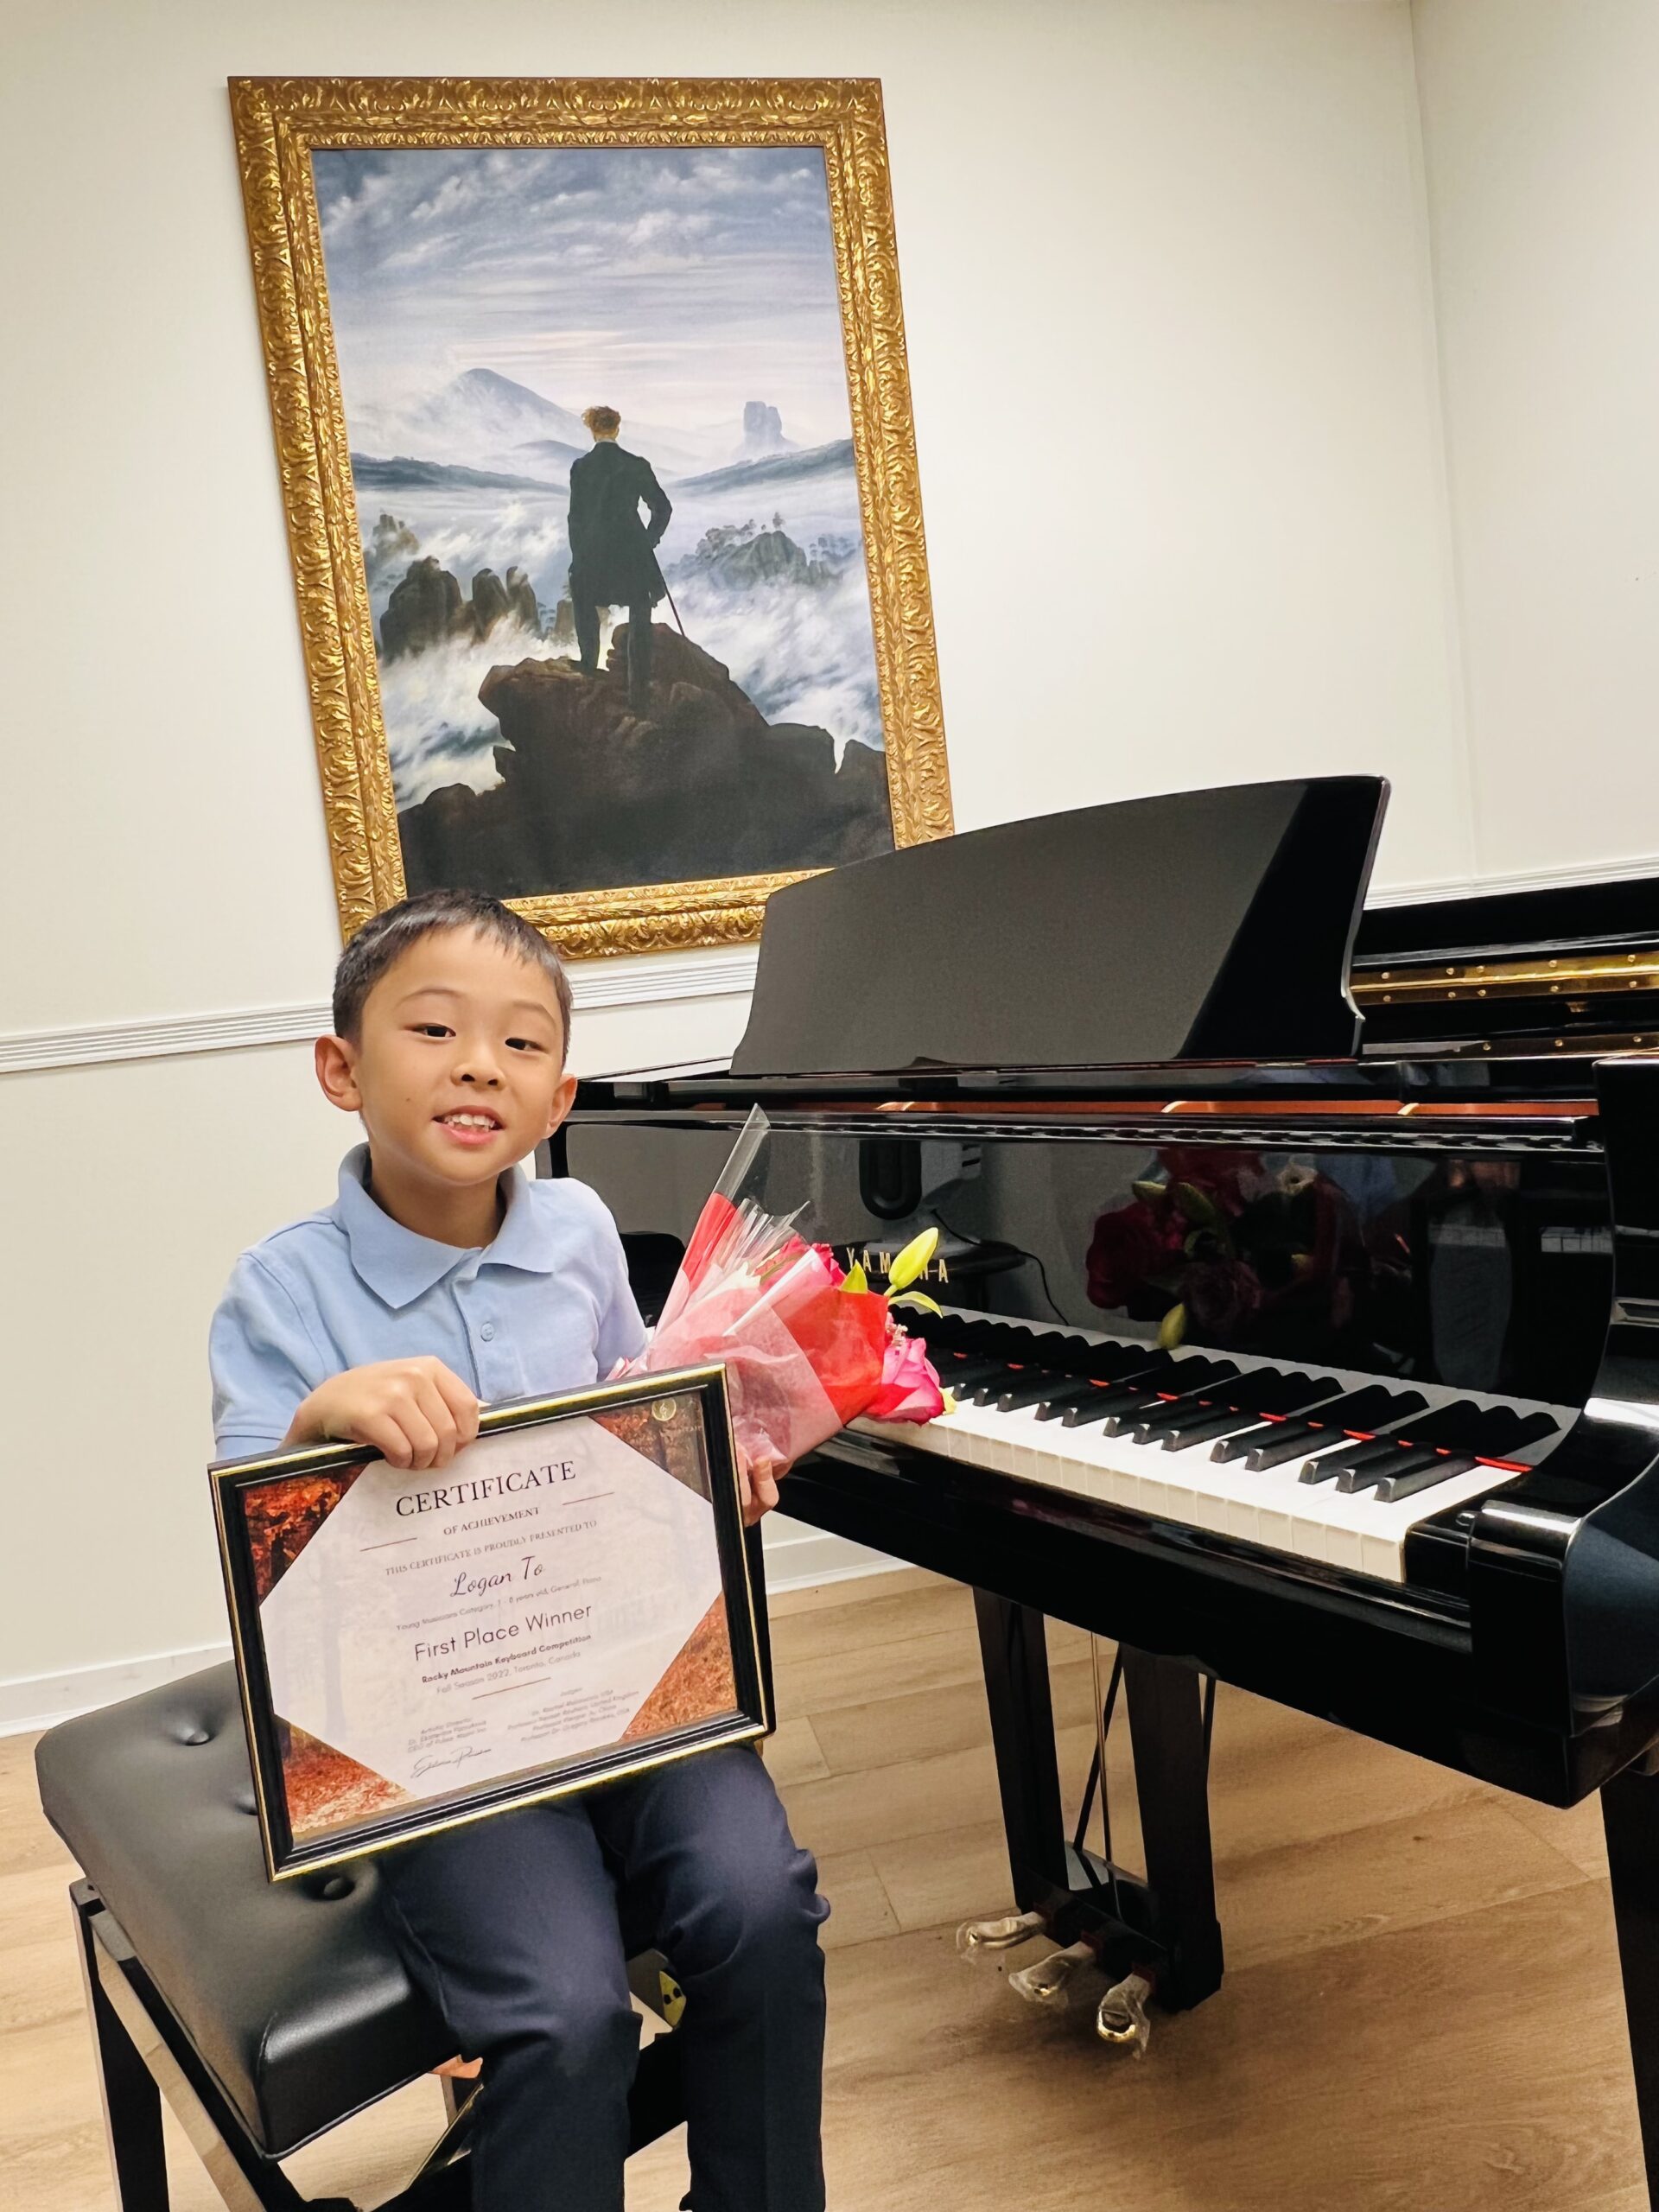 GOLD MEDAL WINNER OF THE ROCKY MOUNTAIN PIANO COMPETITION